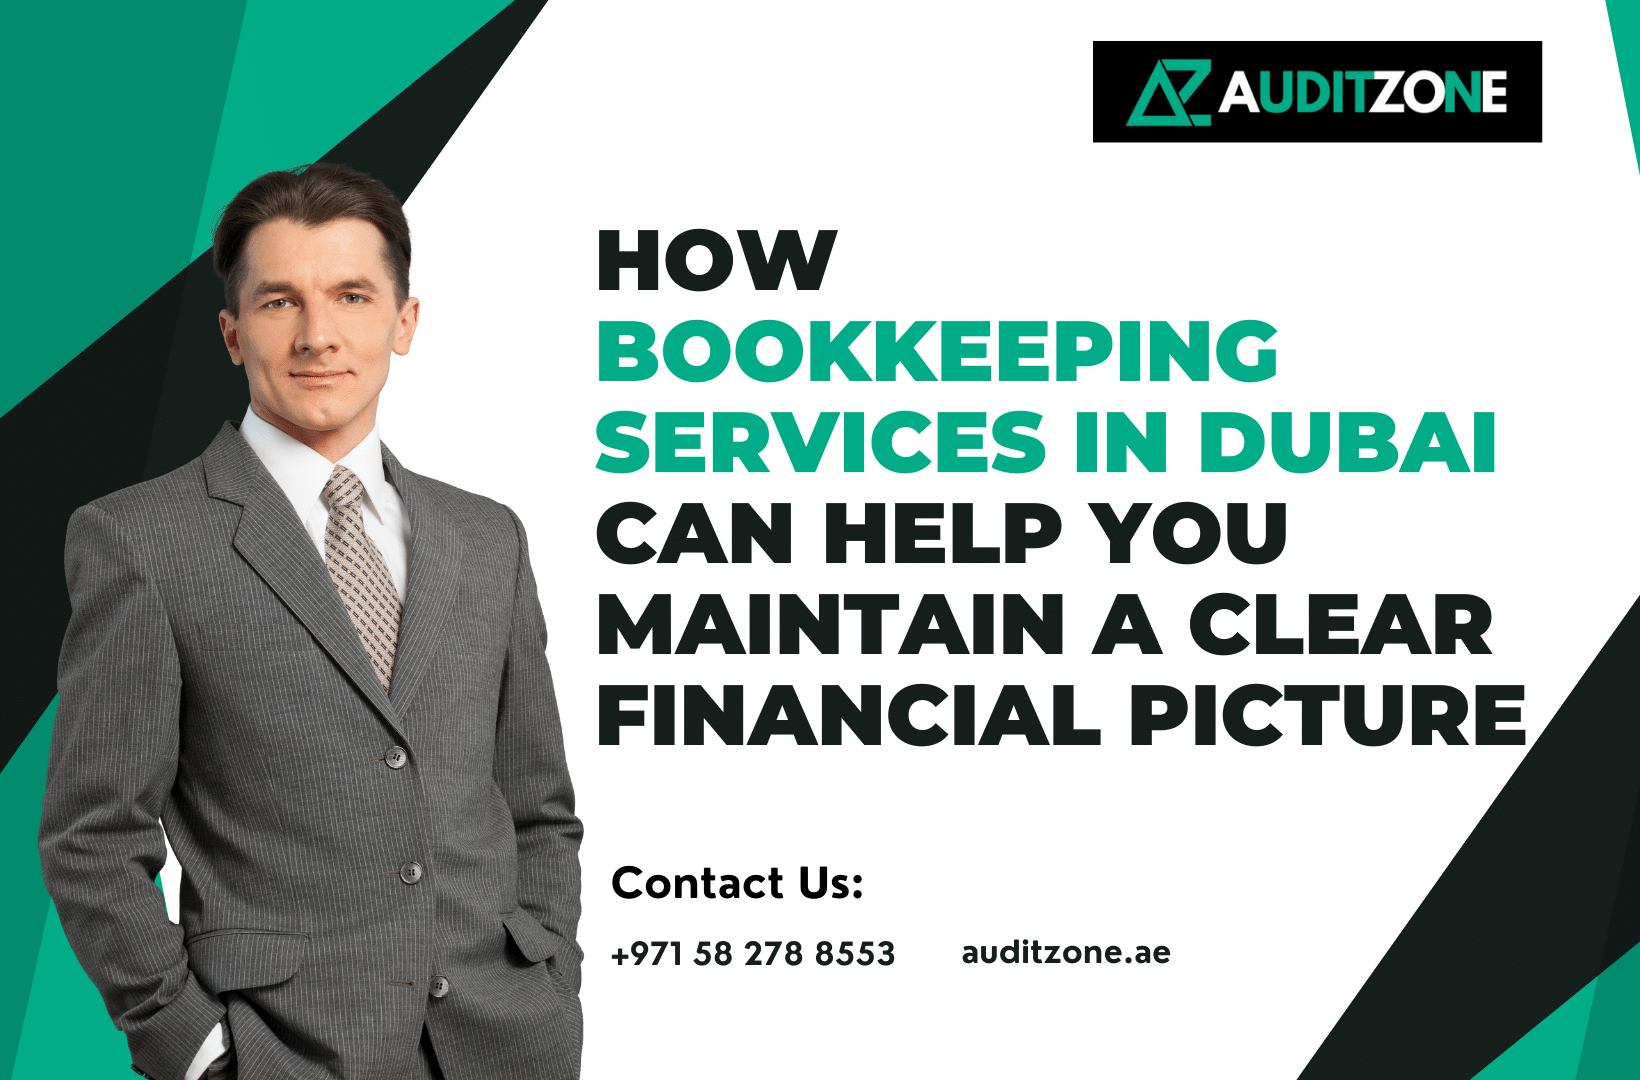 How Bookkeeping Services in Dubai Can Help You Maintain a Clear Financial Picture